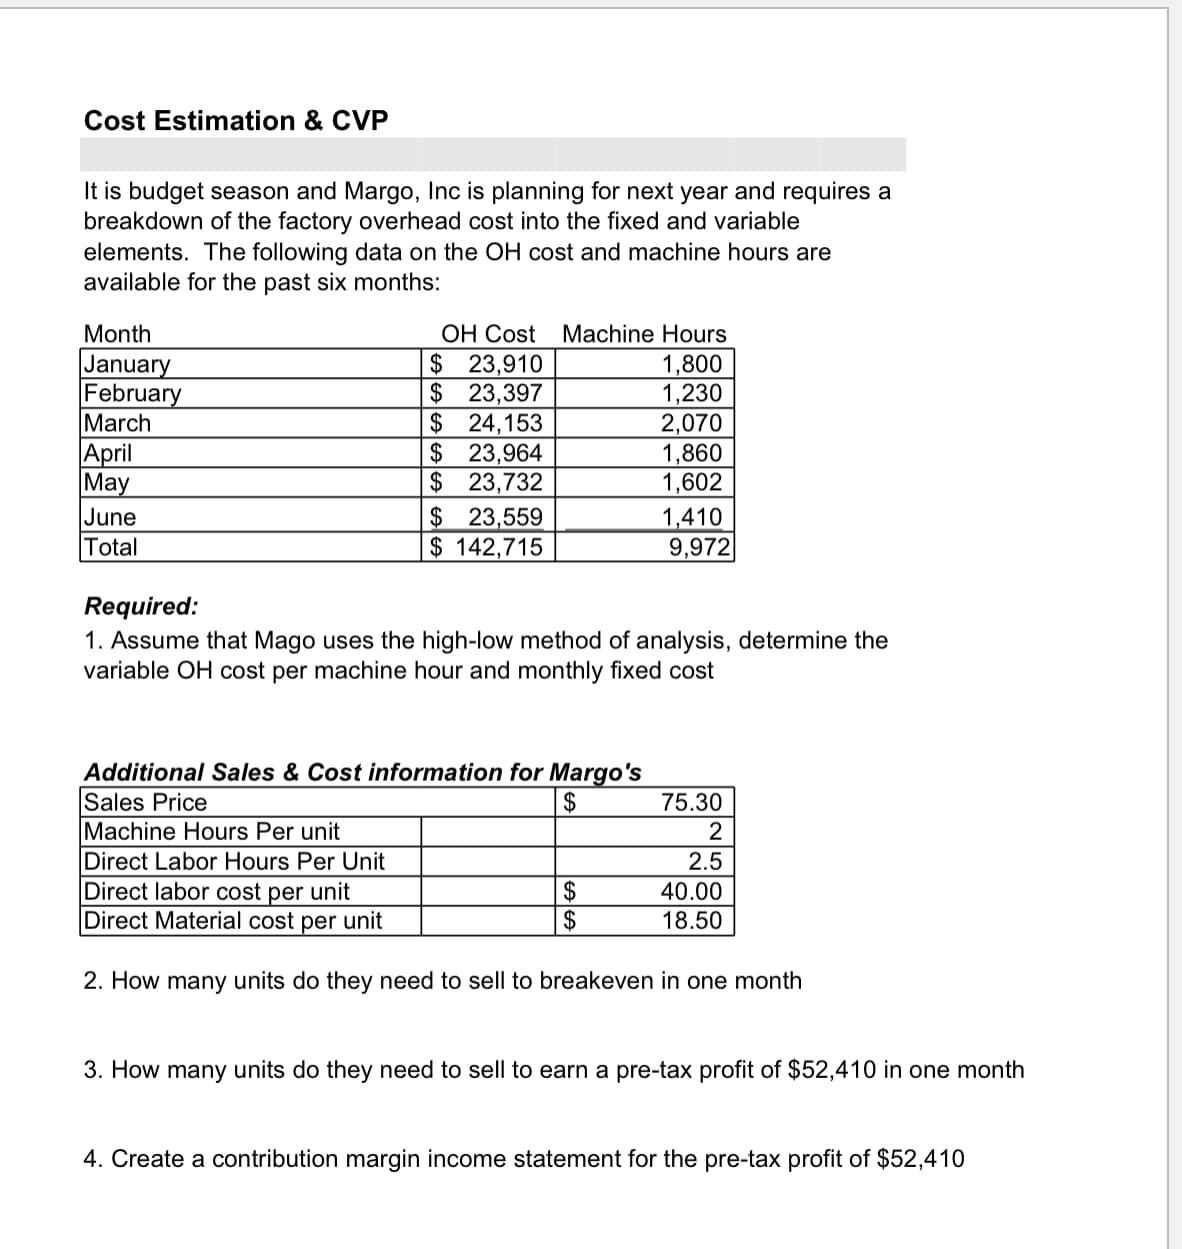 Cost Estimation & CVP
It is budget season and Margo, Inc is planning for next year and requires a
breakdown of the factory overhead cost into the fixed and variable
elements. The following data on the OH cost and machine hours are
available for the past six months:
OH Cost Machine Hours
$ 23,910
$ 23,397
$24,153
$23,964
$ 23,732
$ 23,559
$ 142,715
Month
January
February
March
April
May
June
Total
1,800
1,230
2,070
1,860
1,602
1,410
9,972
Required:
1. Assume that Mago uses the high-low method of analysis, determine the
variable OH cost per machine hour and monthly fixed cost
Additional Sales & Cost information for Margo's
Sales Price
Machine Hours Per unit
Direct Labor Hours Per Unit
Direct labor cost per unit
Direct Material cost per unit
2$
75.30
2
2.5
2$
$
40.00
18.50
2. How many units do they need to sell to breakeven in one month
3. How many units do they need to sell to earn a pre-tax profit of $52,410 in one month
4. Create a contribution margin income statement for the pre-tax profit of $52,410
